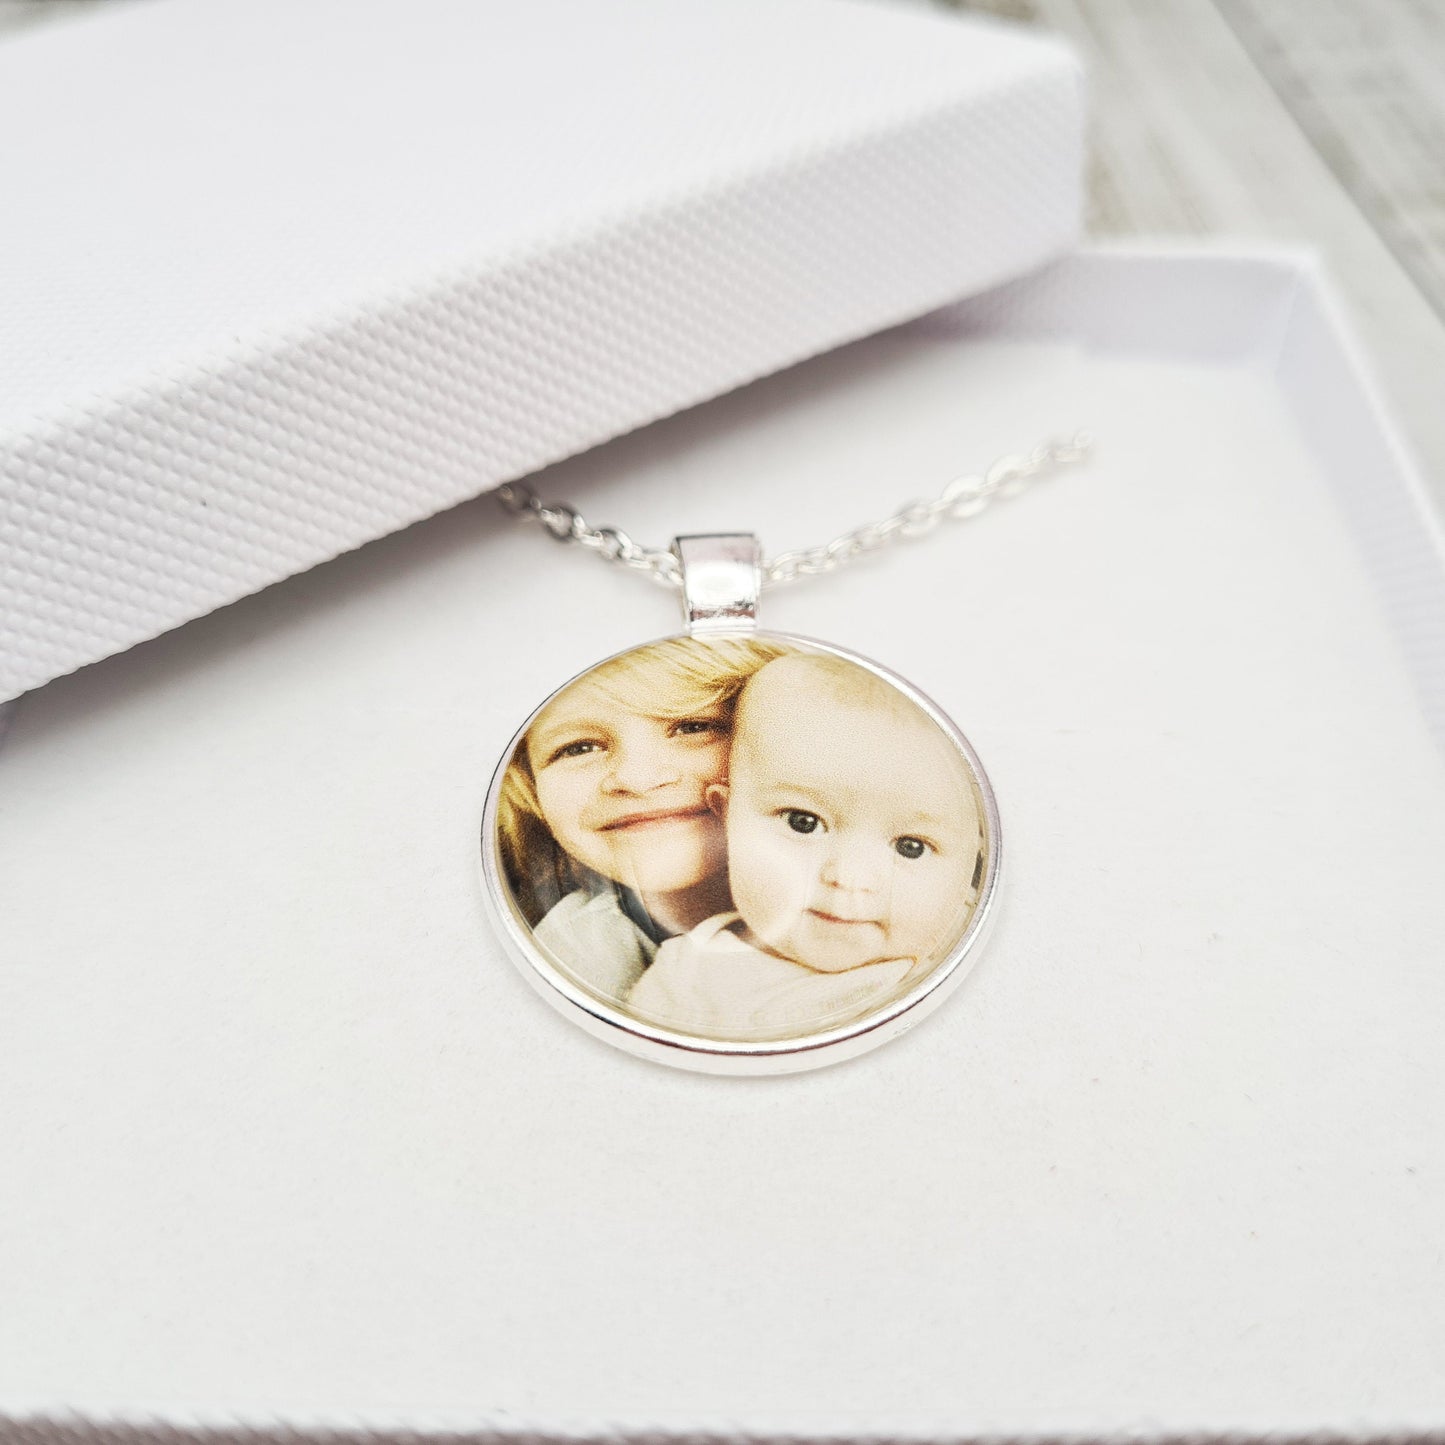 Silver necklace and pendant with personalised photo set in glass inside a white gift box